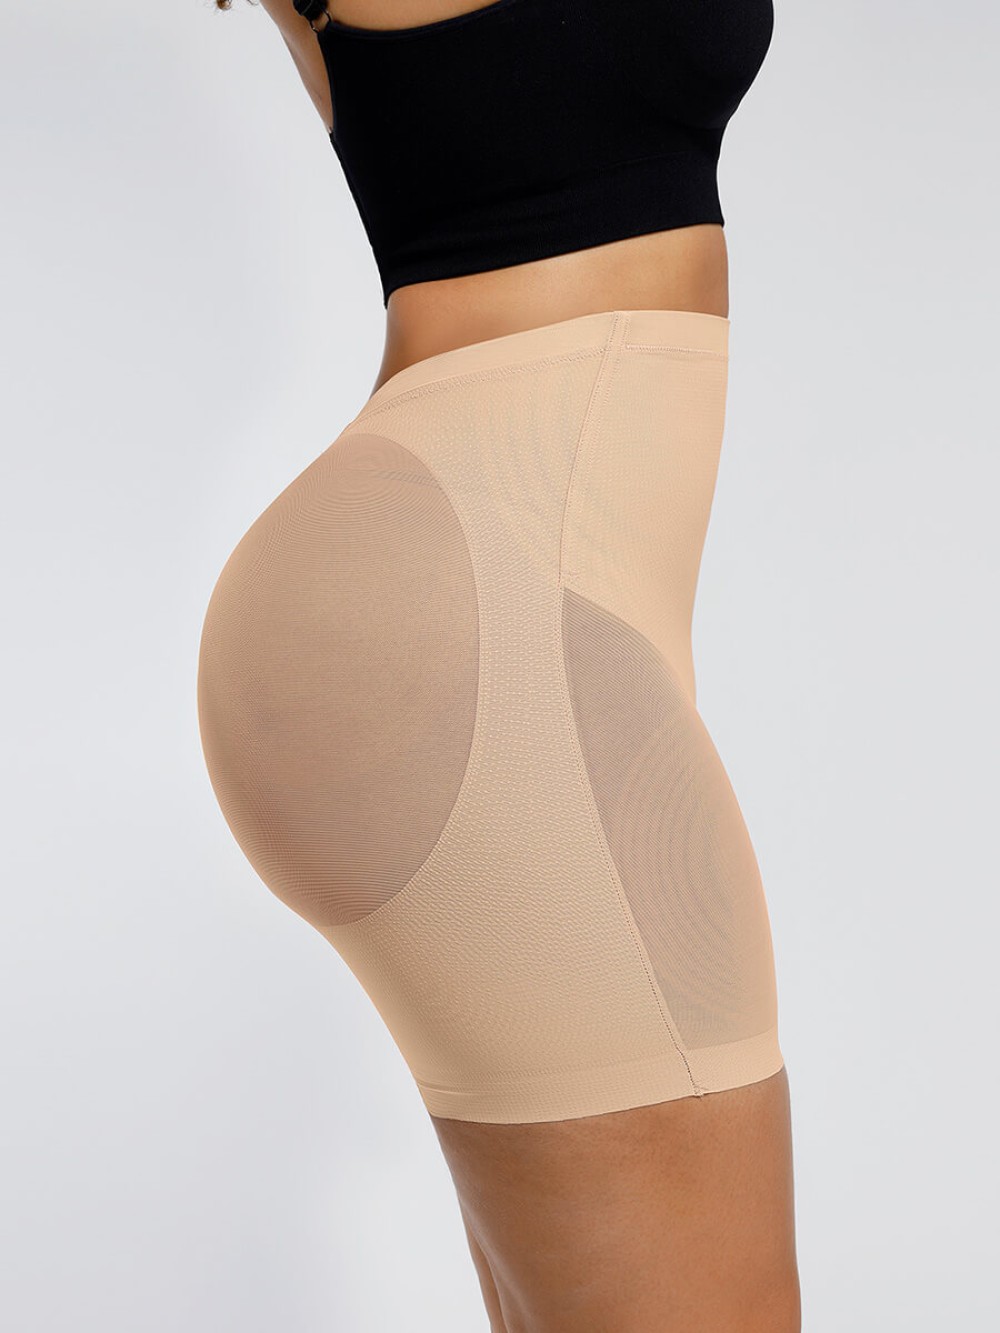 New Tummy Slimming Leg Back Low Waist Fitted Mesh Body Butt Lifter